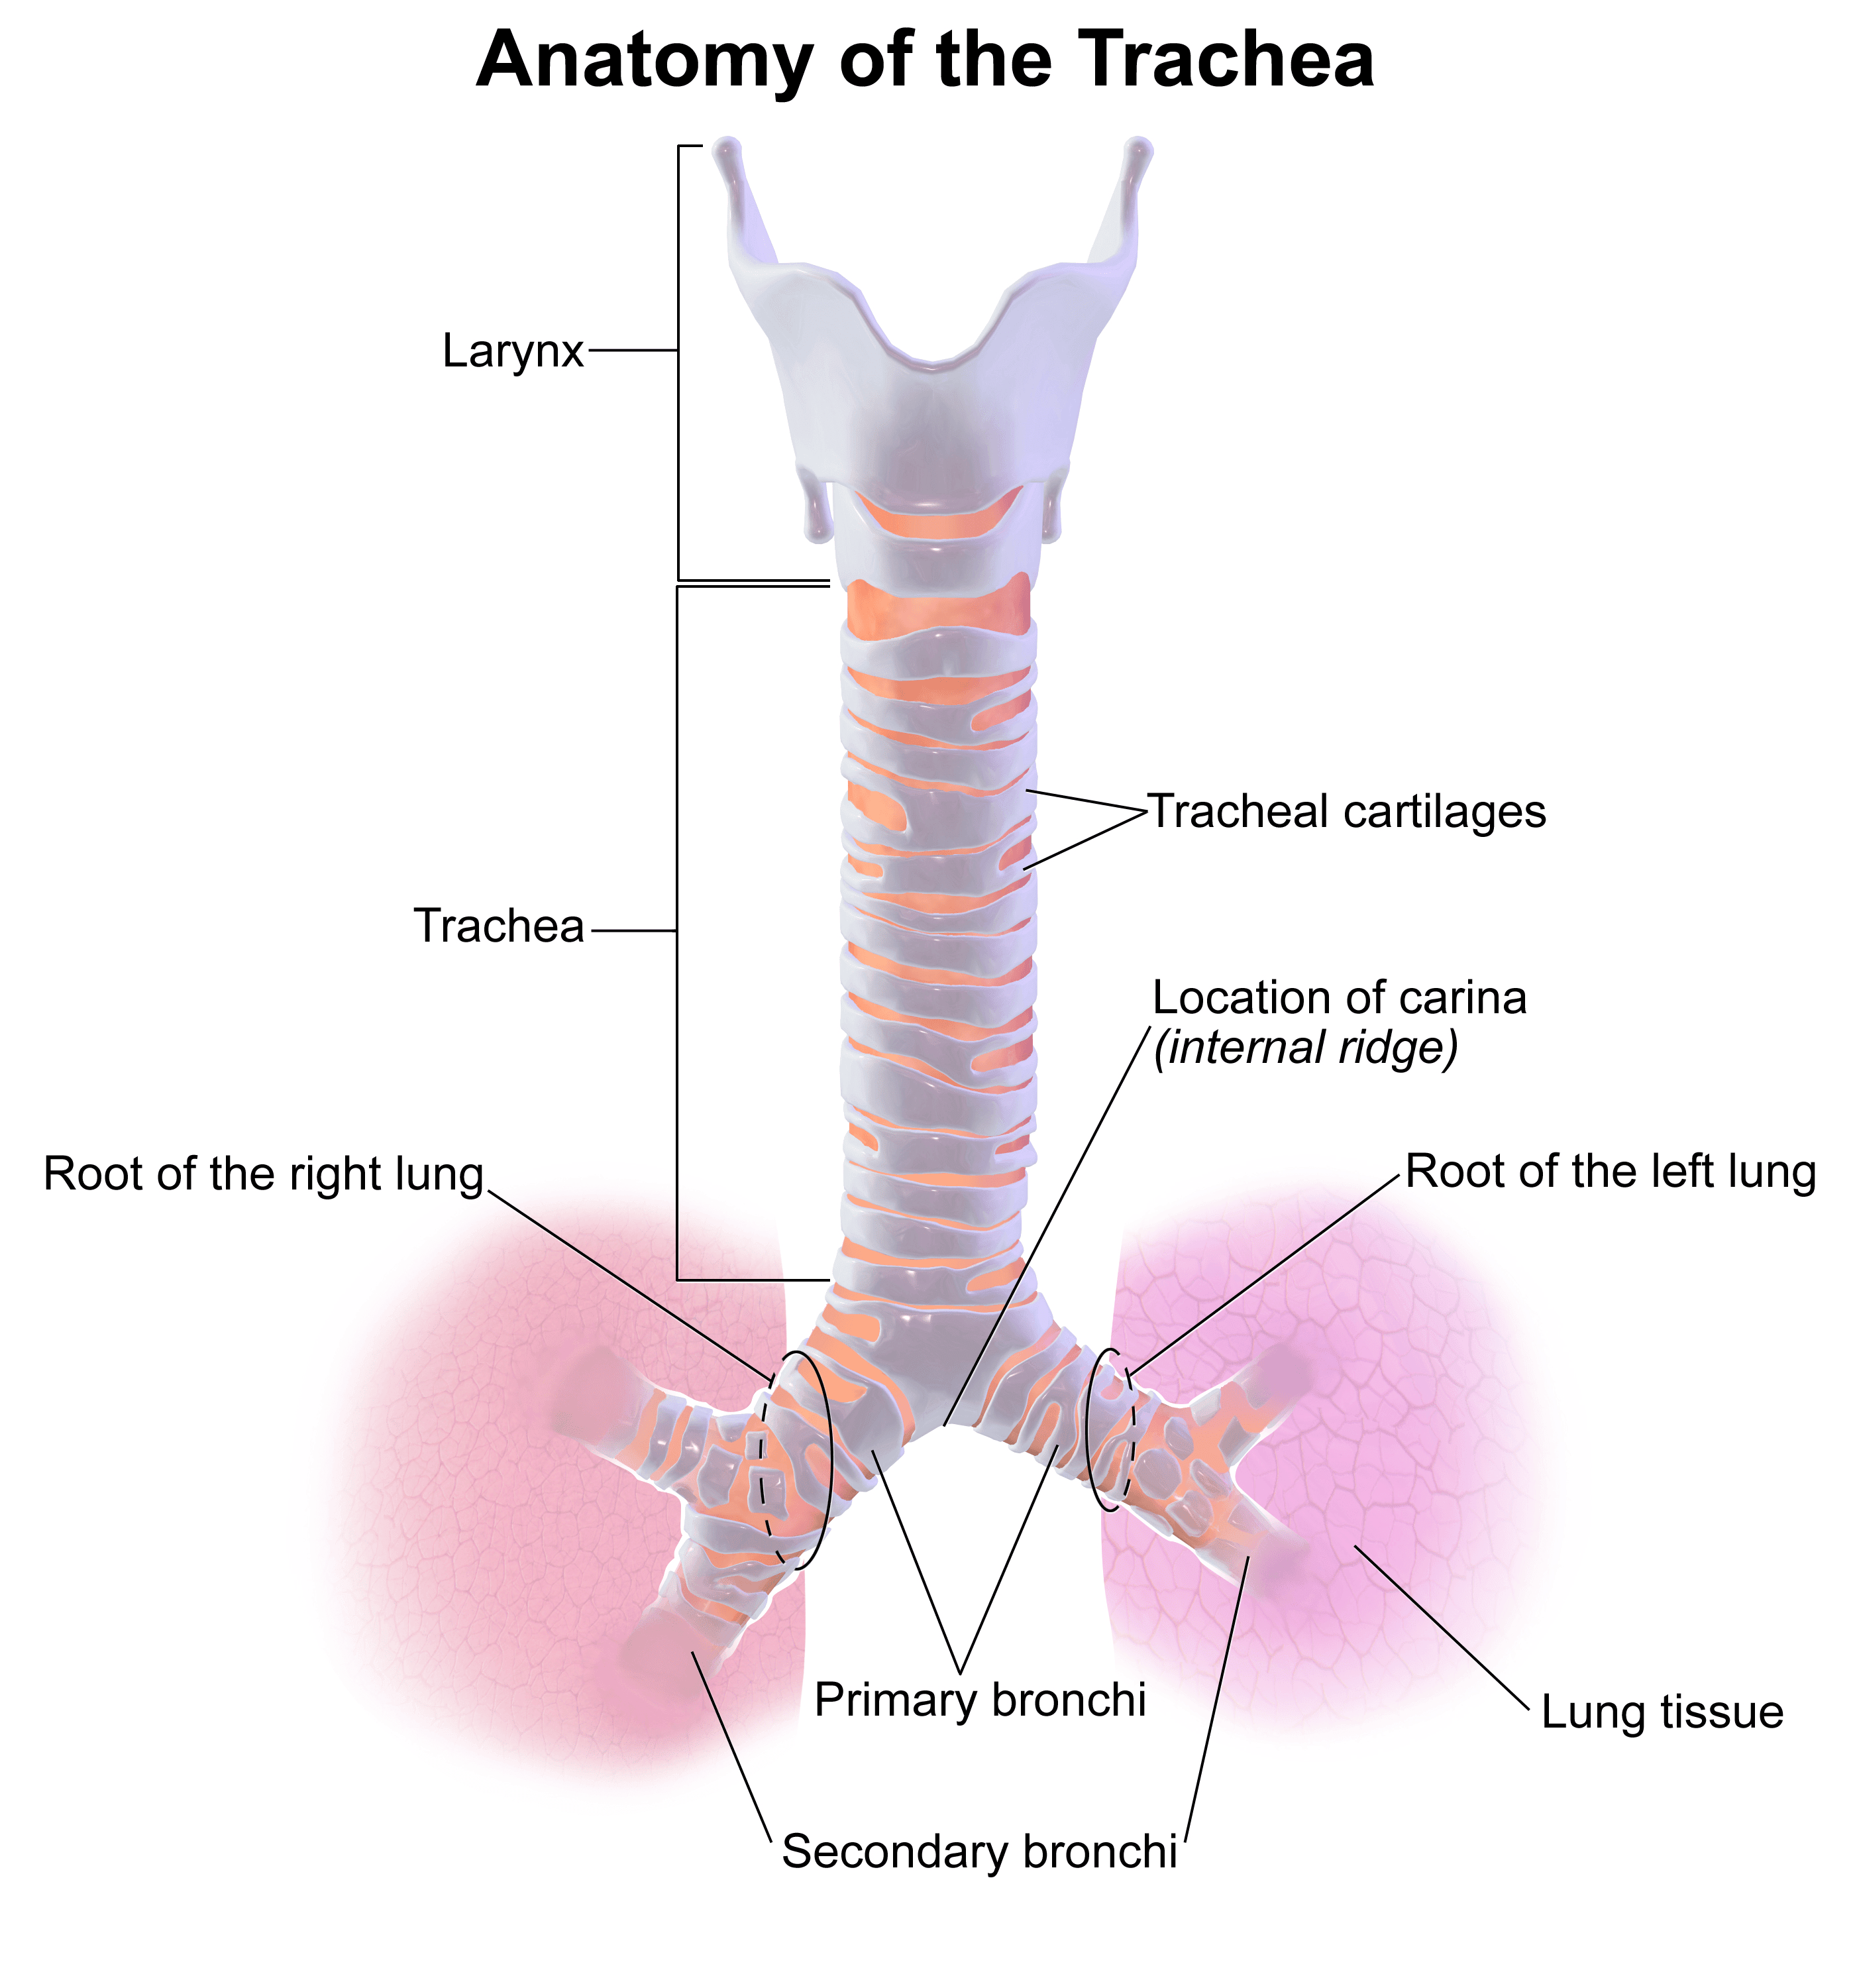 The Anatomy of the Trachea SimpleMed